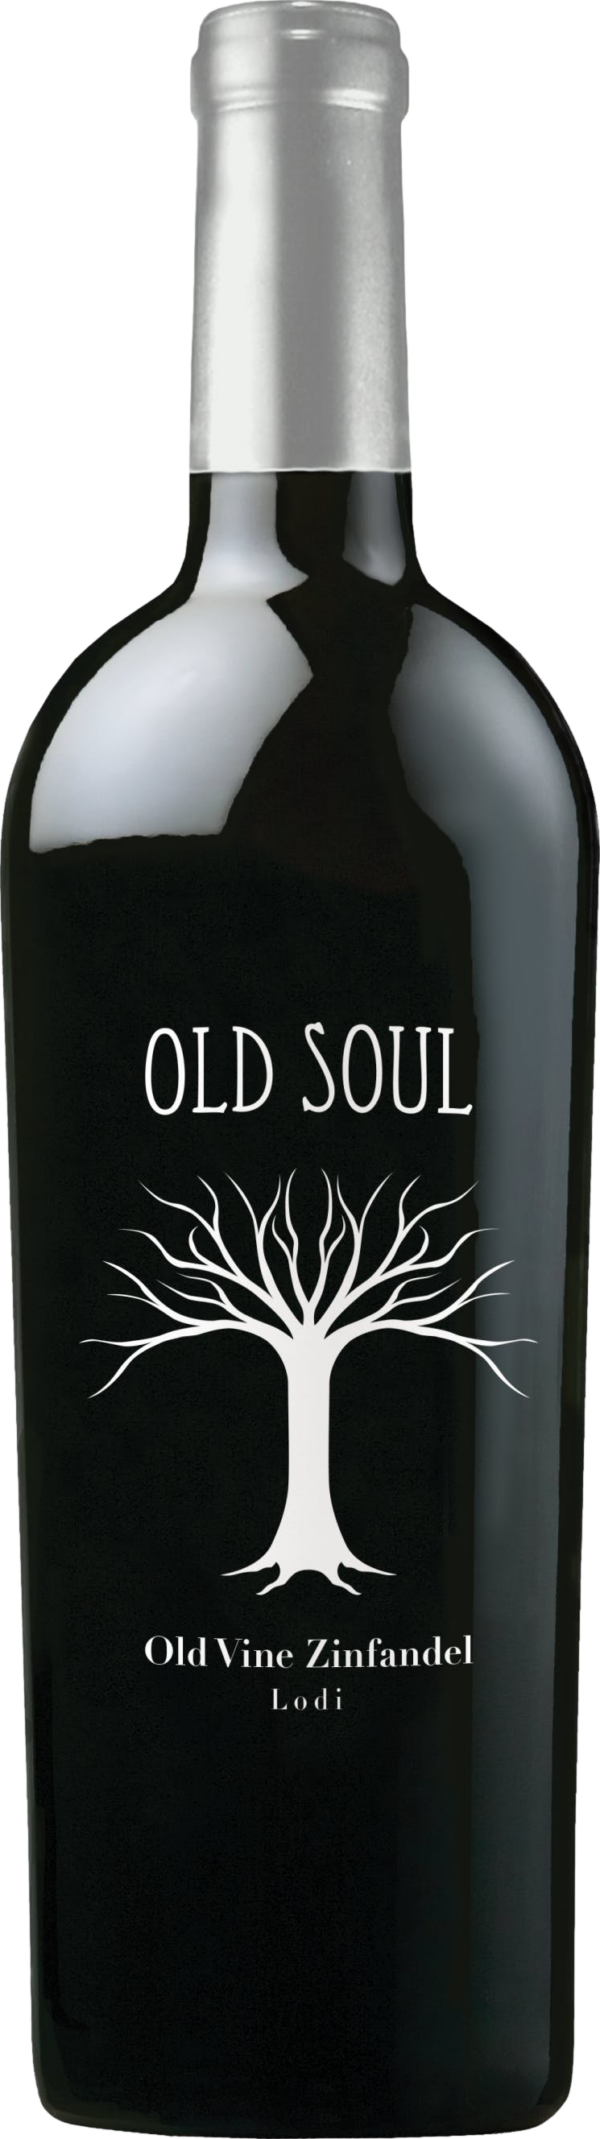 Product image of Old Soul Old Vine Zinfandel 2022 from 8wines